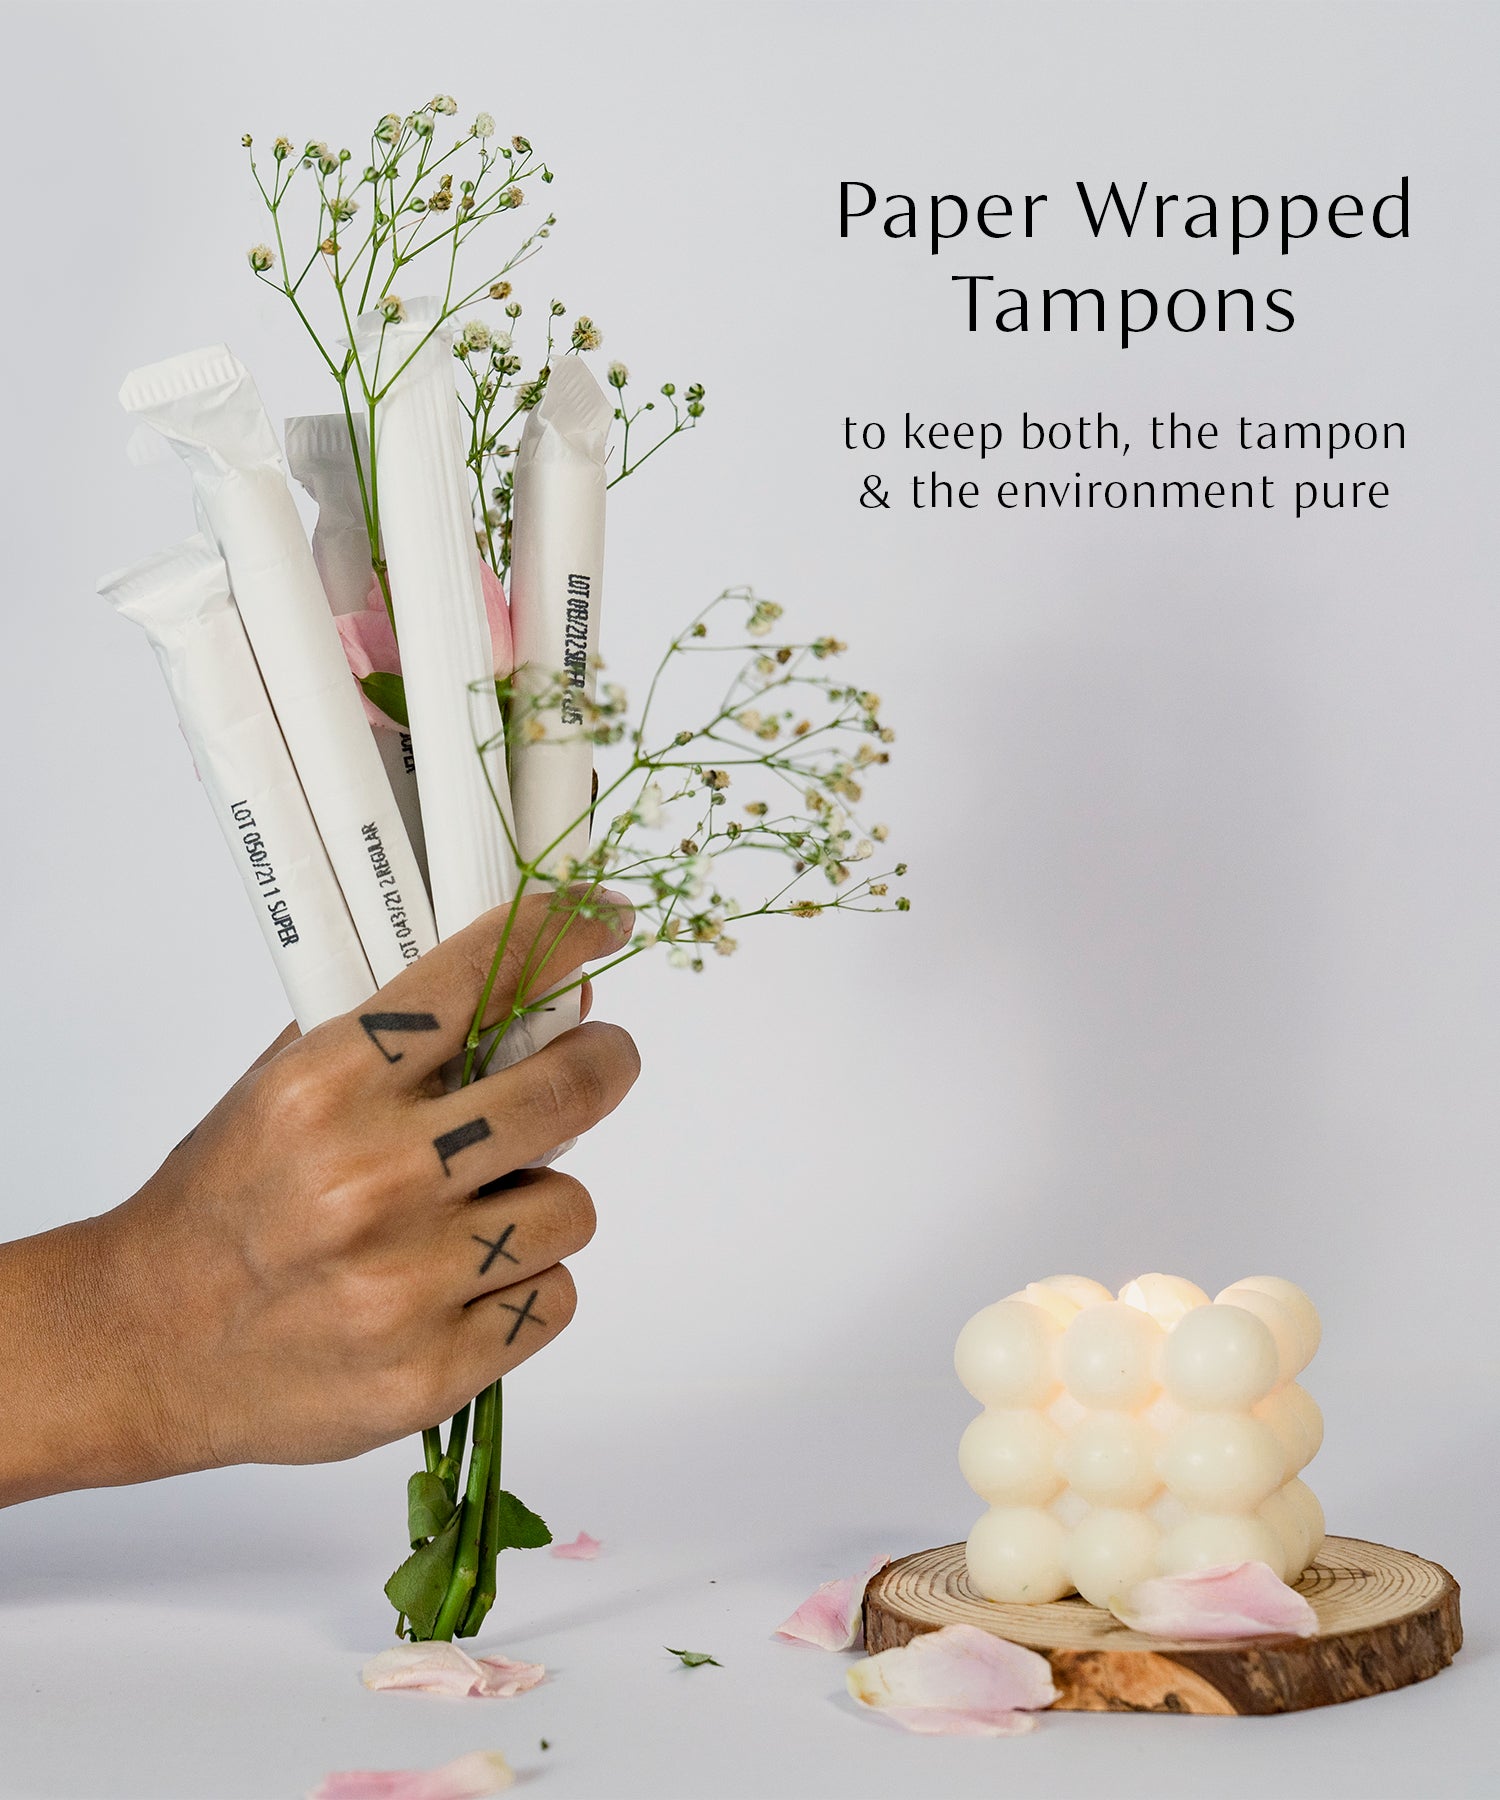 100% Organic Cotton Tampons with Applicators | Cotton Lock Technology